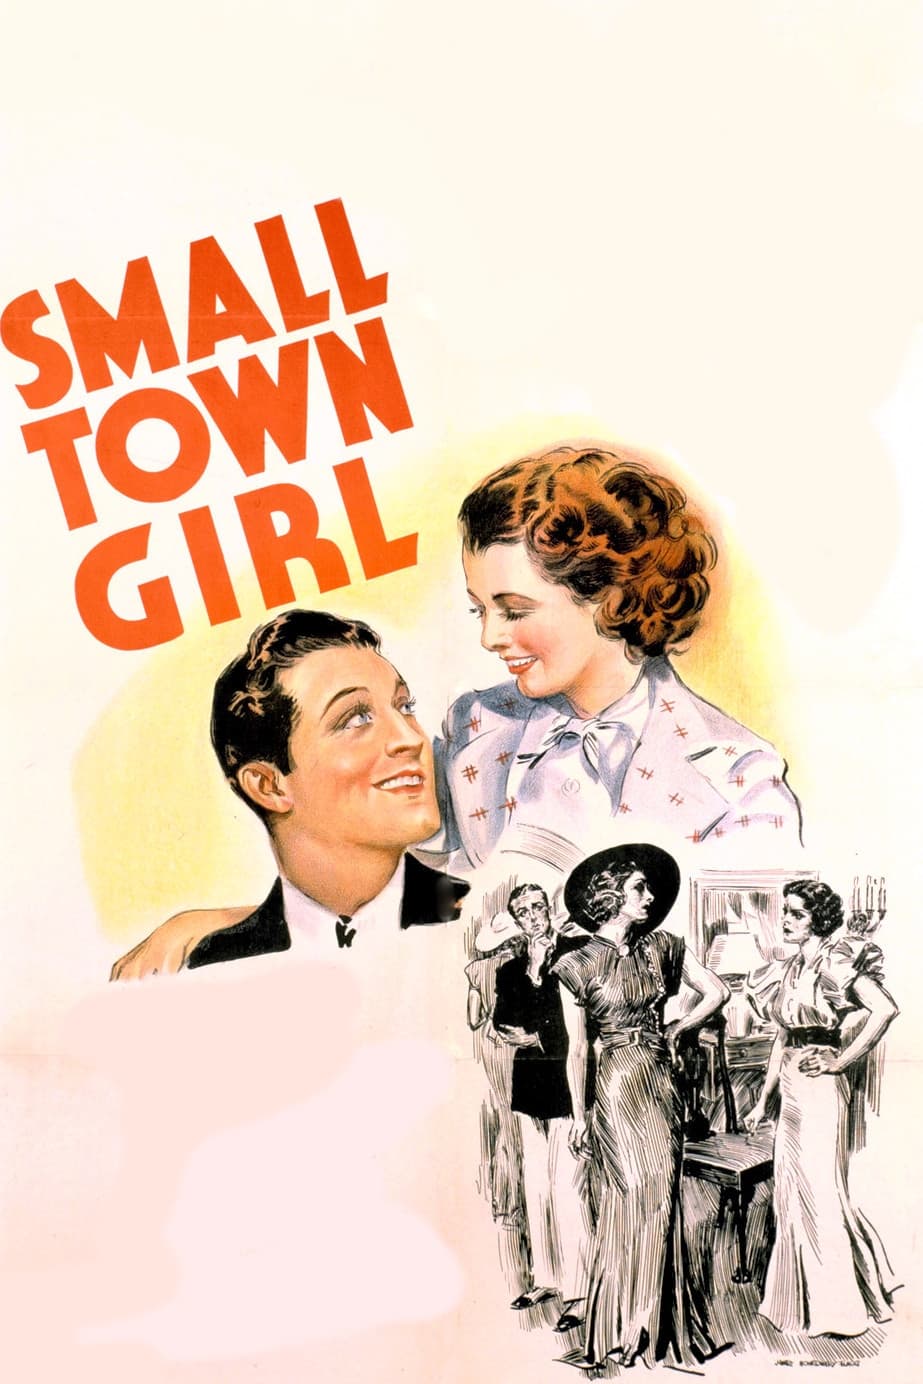 Small Town Girl (1936)